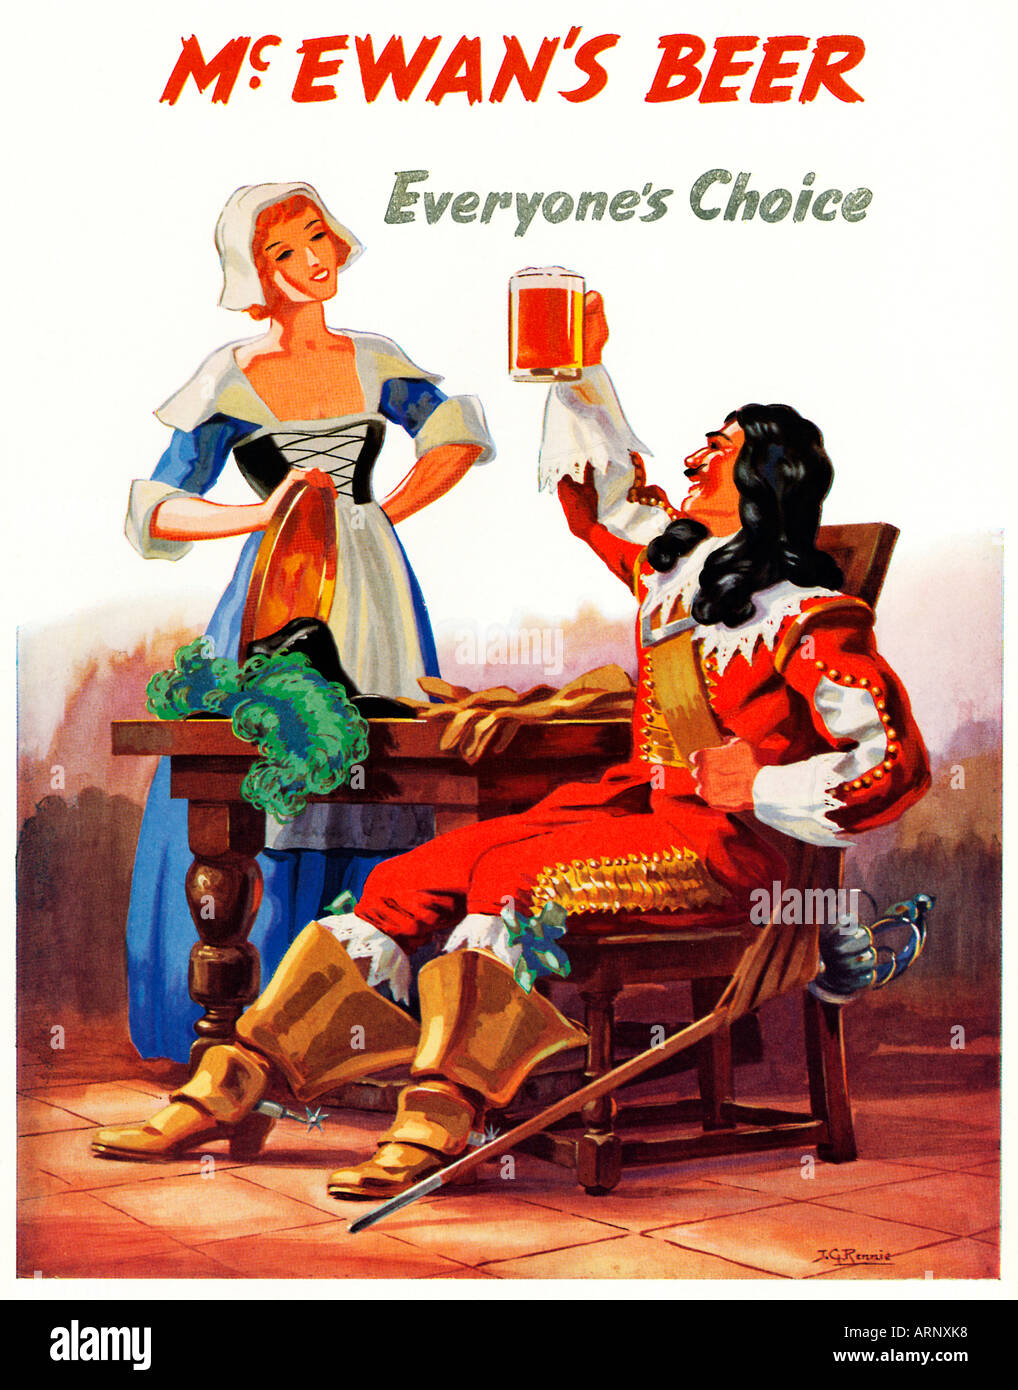 McEwans Beer Everyones Choice 1950s advert for the Scottish beer Stock Photo